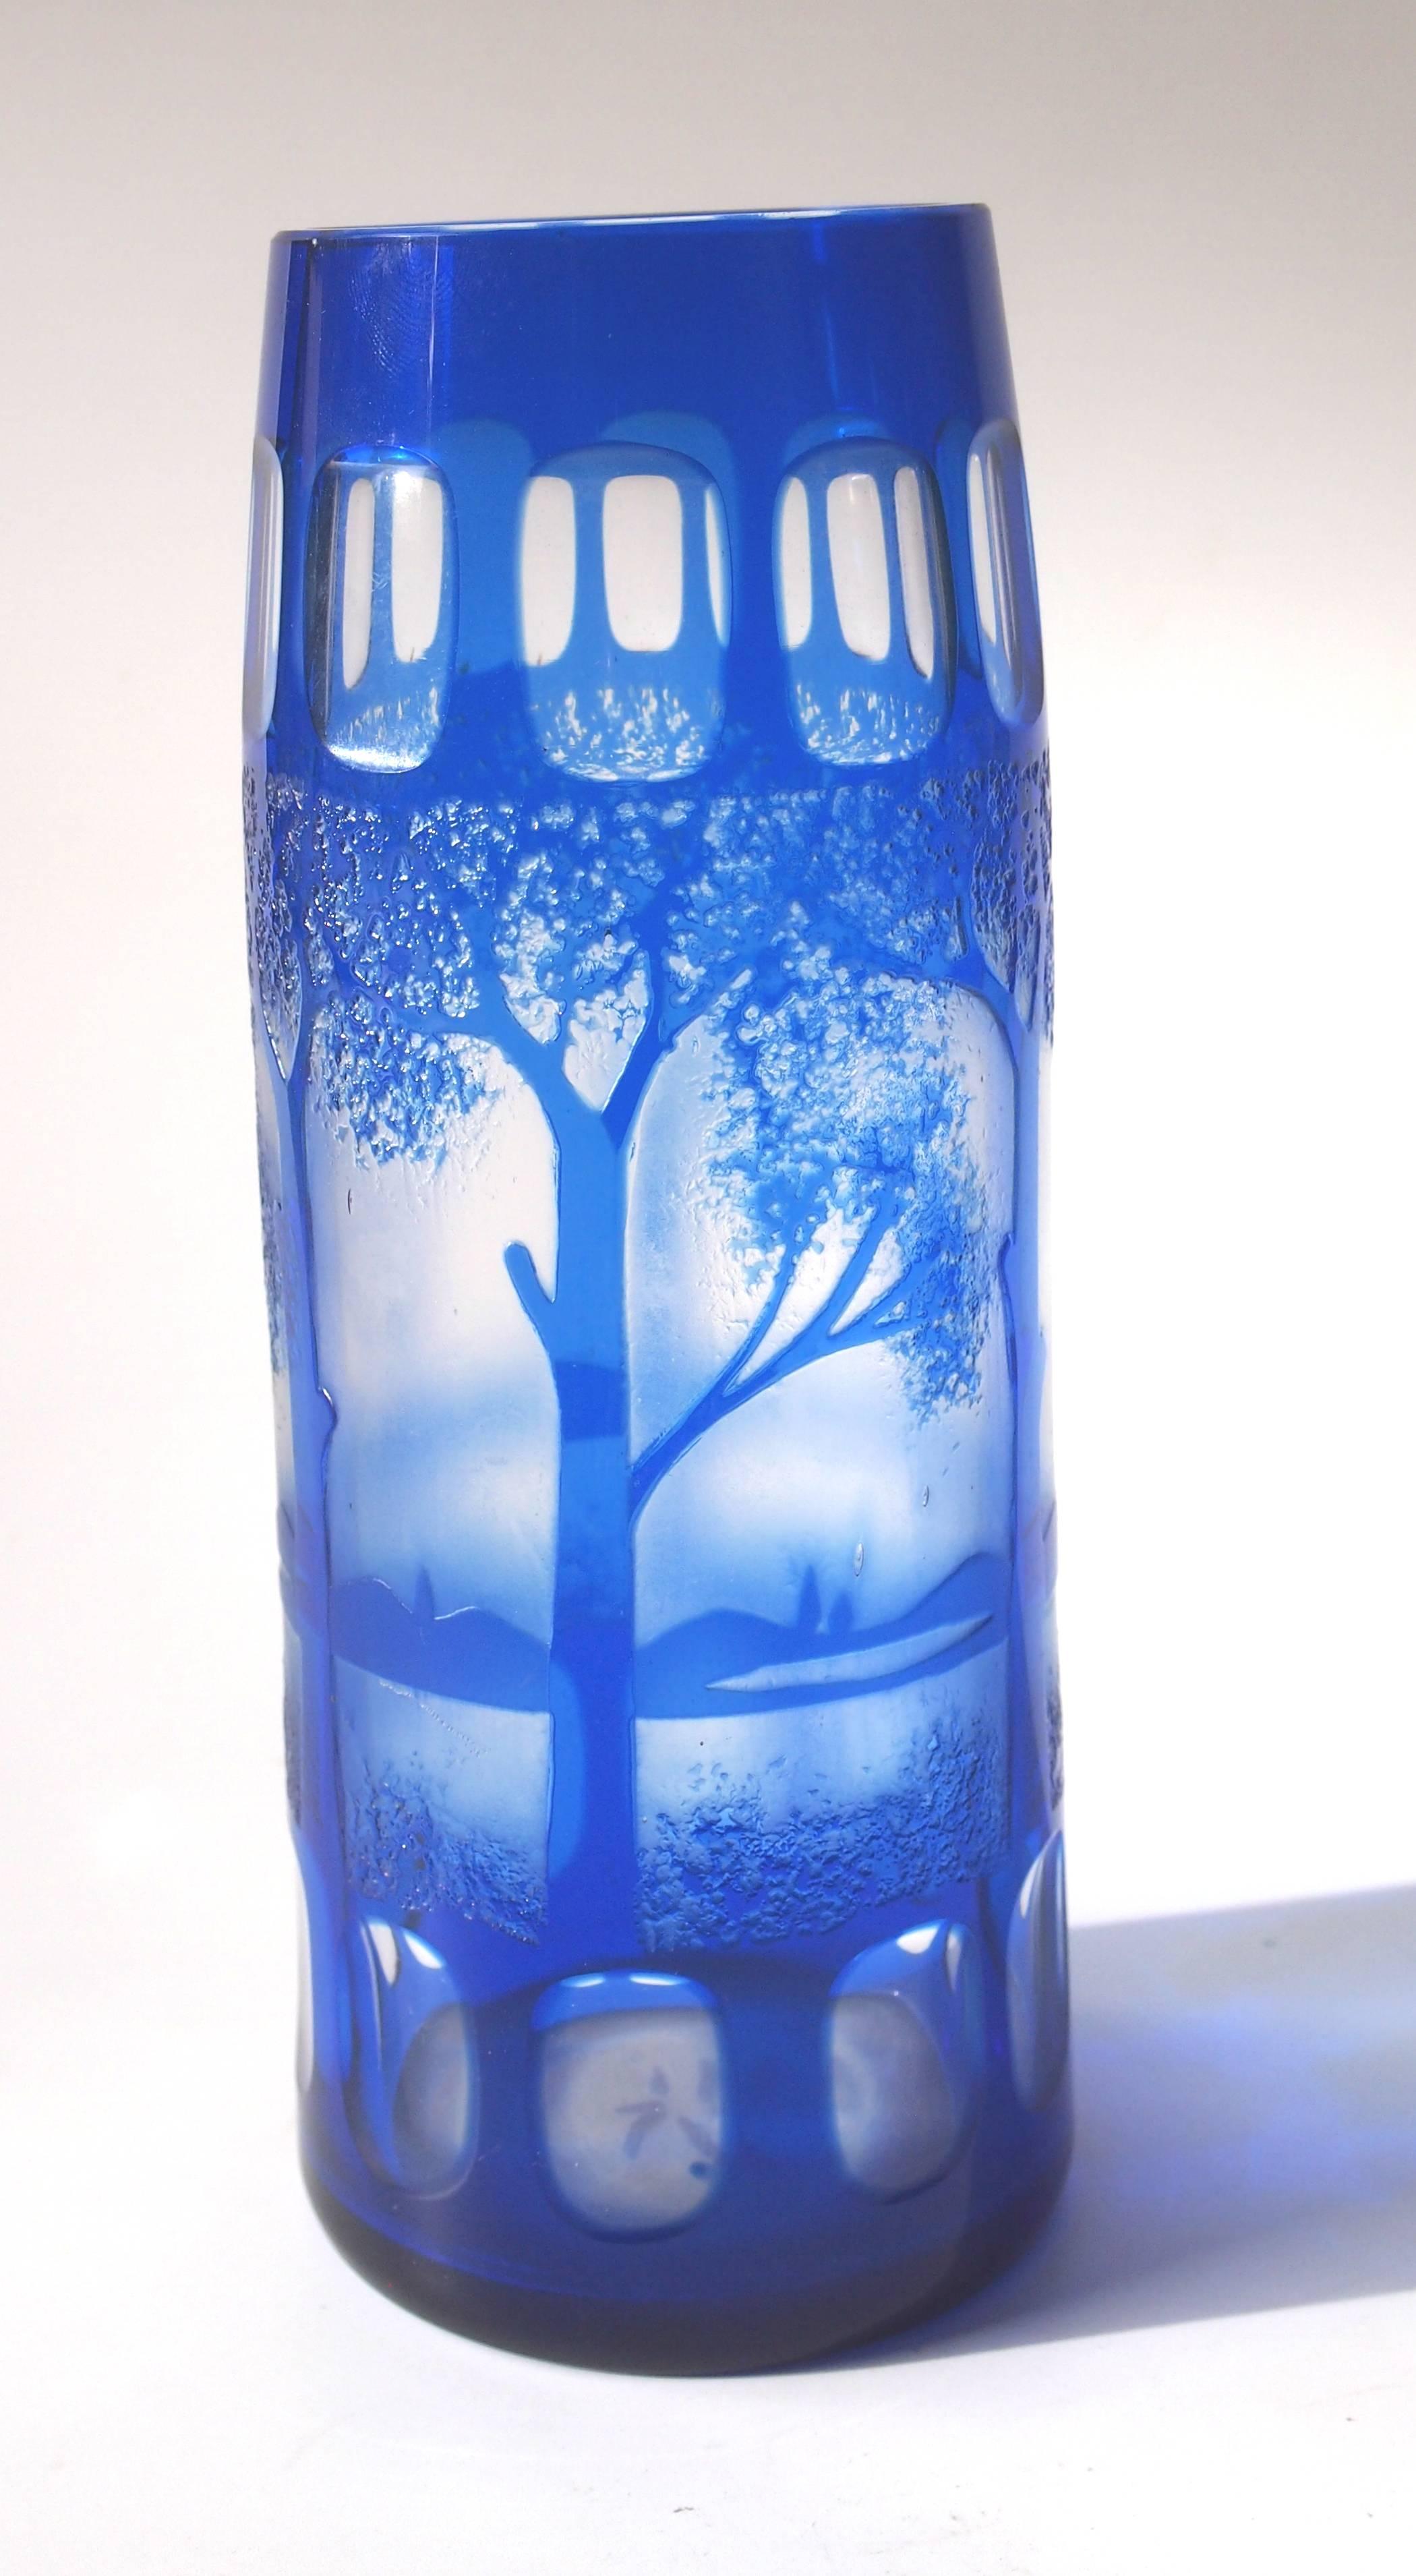 Superb bright blue on clear Kralik Art Deco cameo landscape vase. Depicting a repeating pattern of trees, a lake and a far shore. These vases were made in a variety of sizes and colours. Very few Kralik designs are know, but this appears on one of